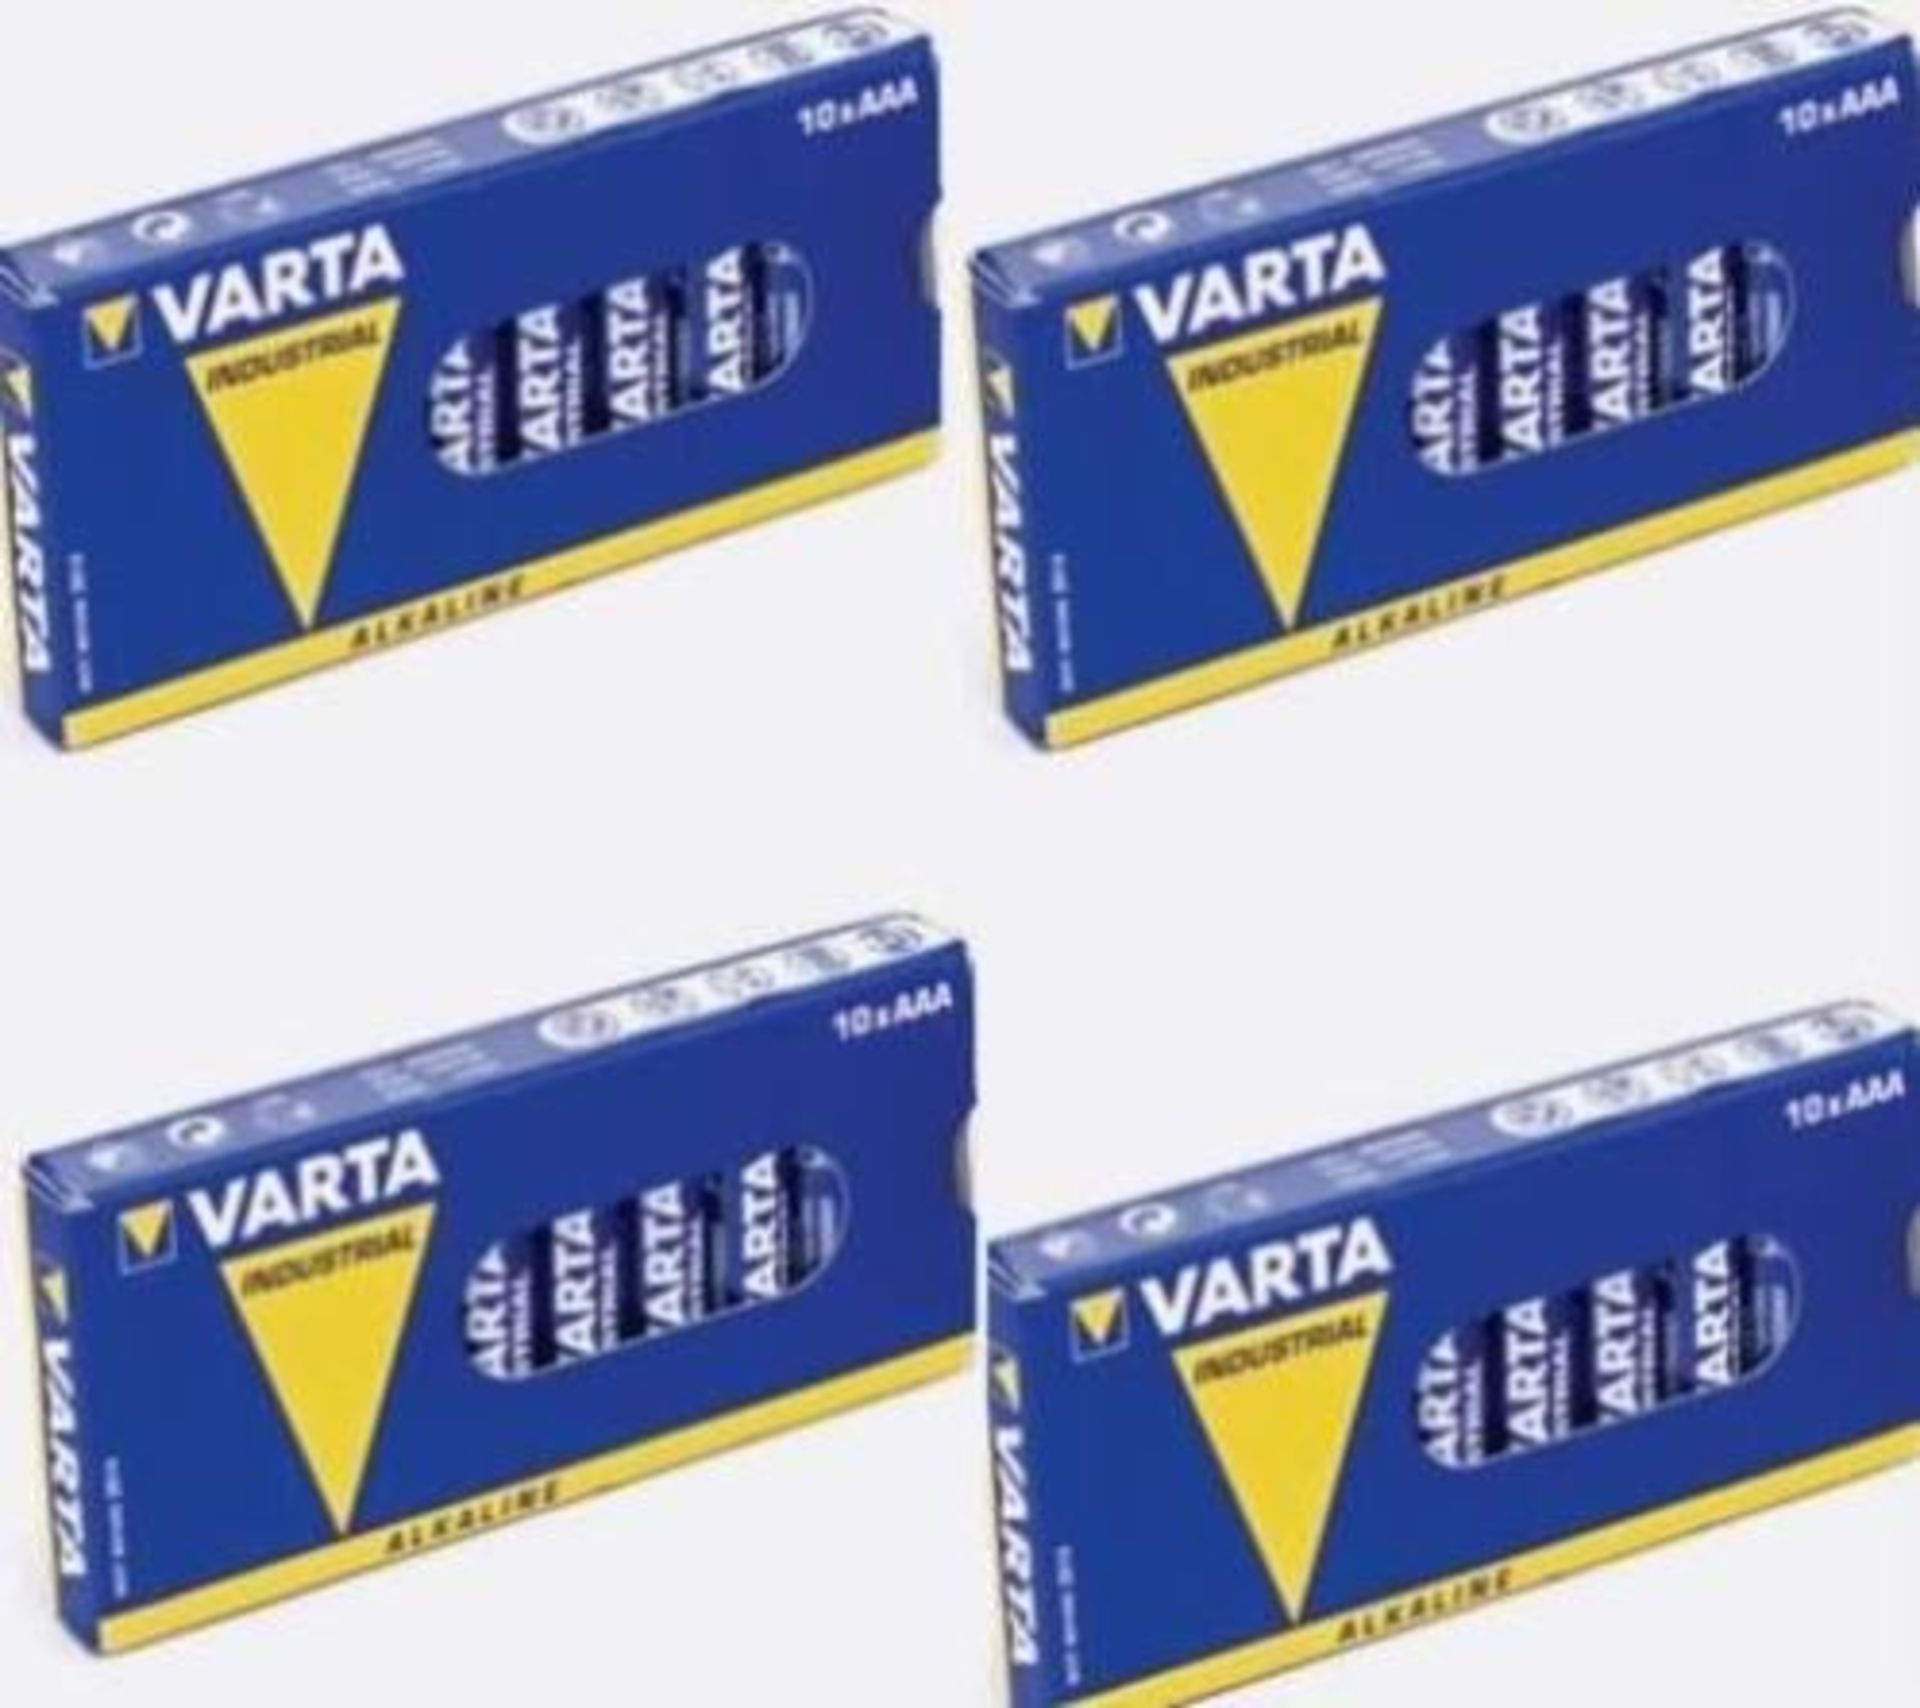 V Brand New Four Packs Of 10 AAA Varta Industrial Batteries X 2 YOUR BID PRICE TO BE MULTIPLIED BY